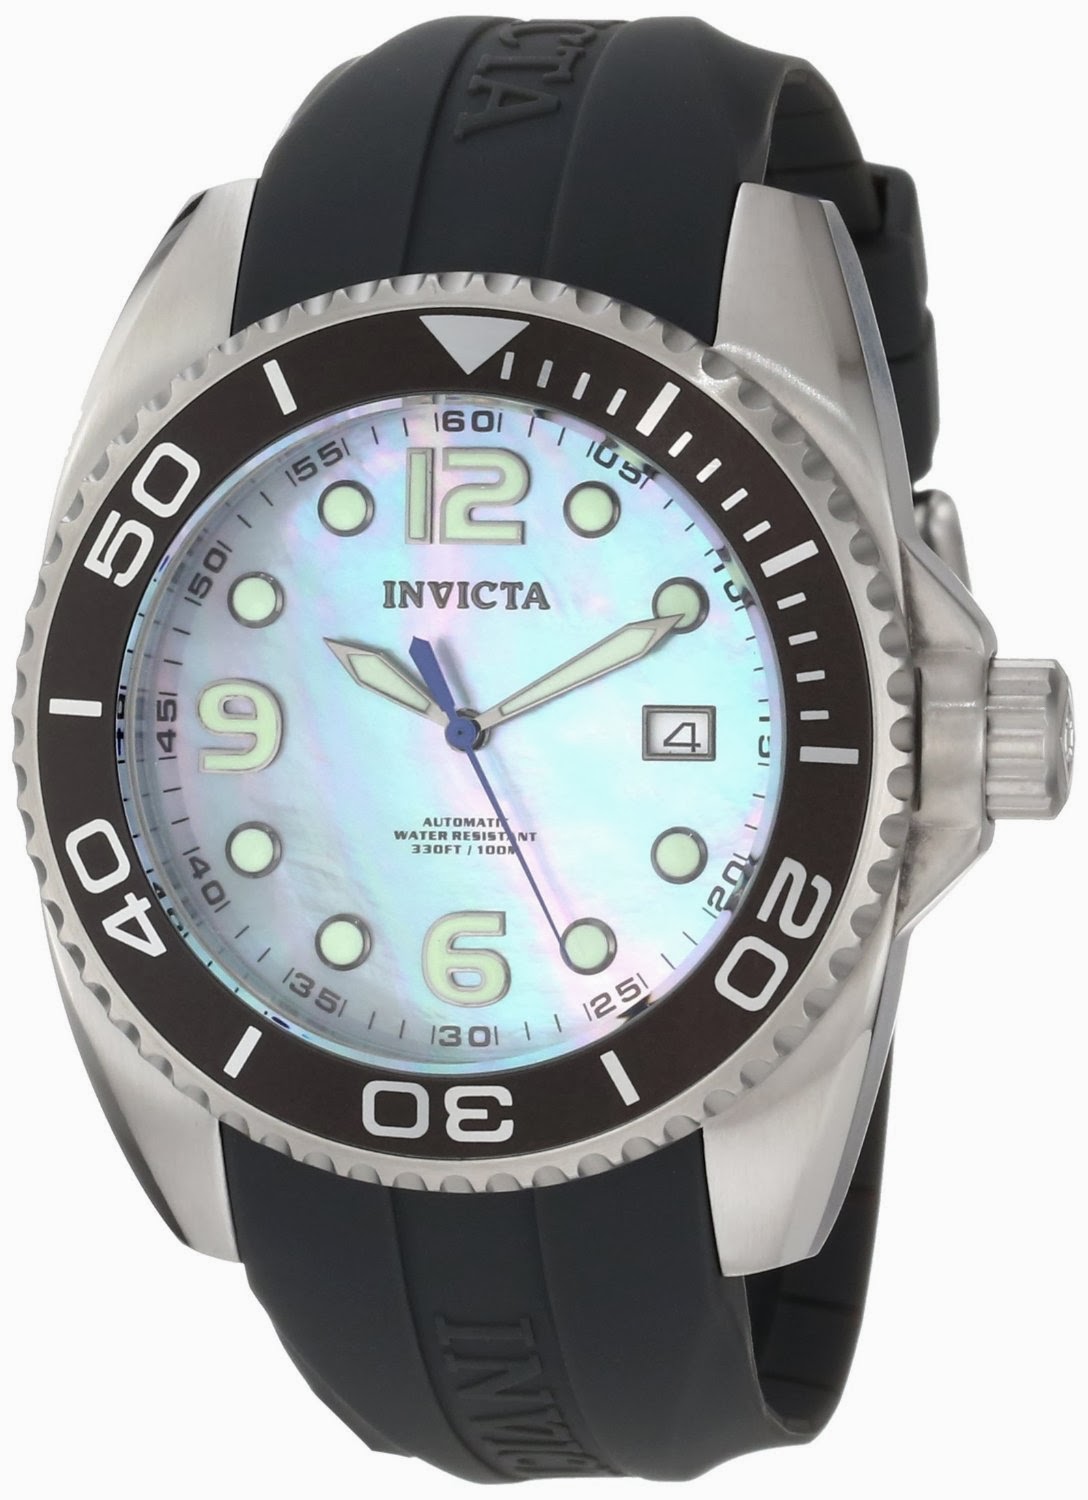 Diver Watch - Invicta 6998 , Pro Diver Collection Stainless Steel and ...